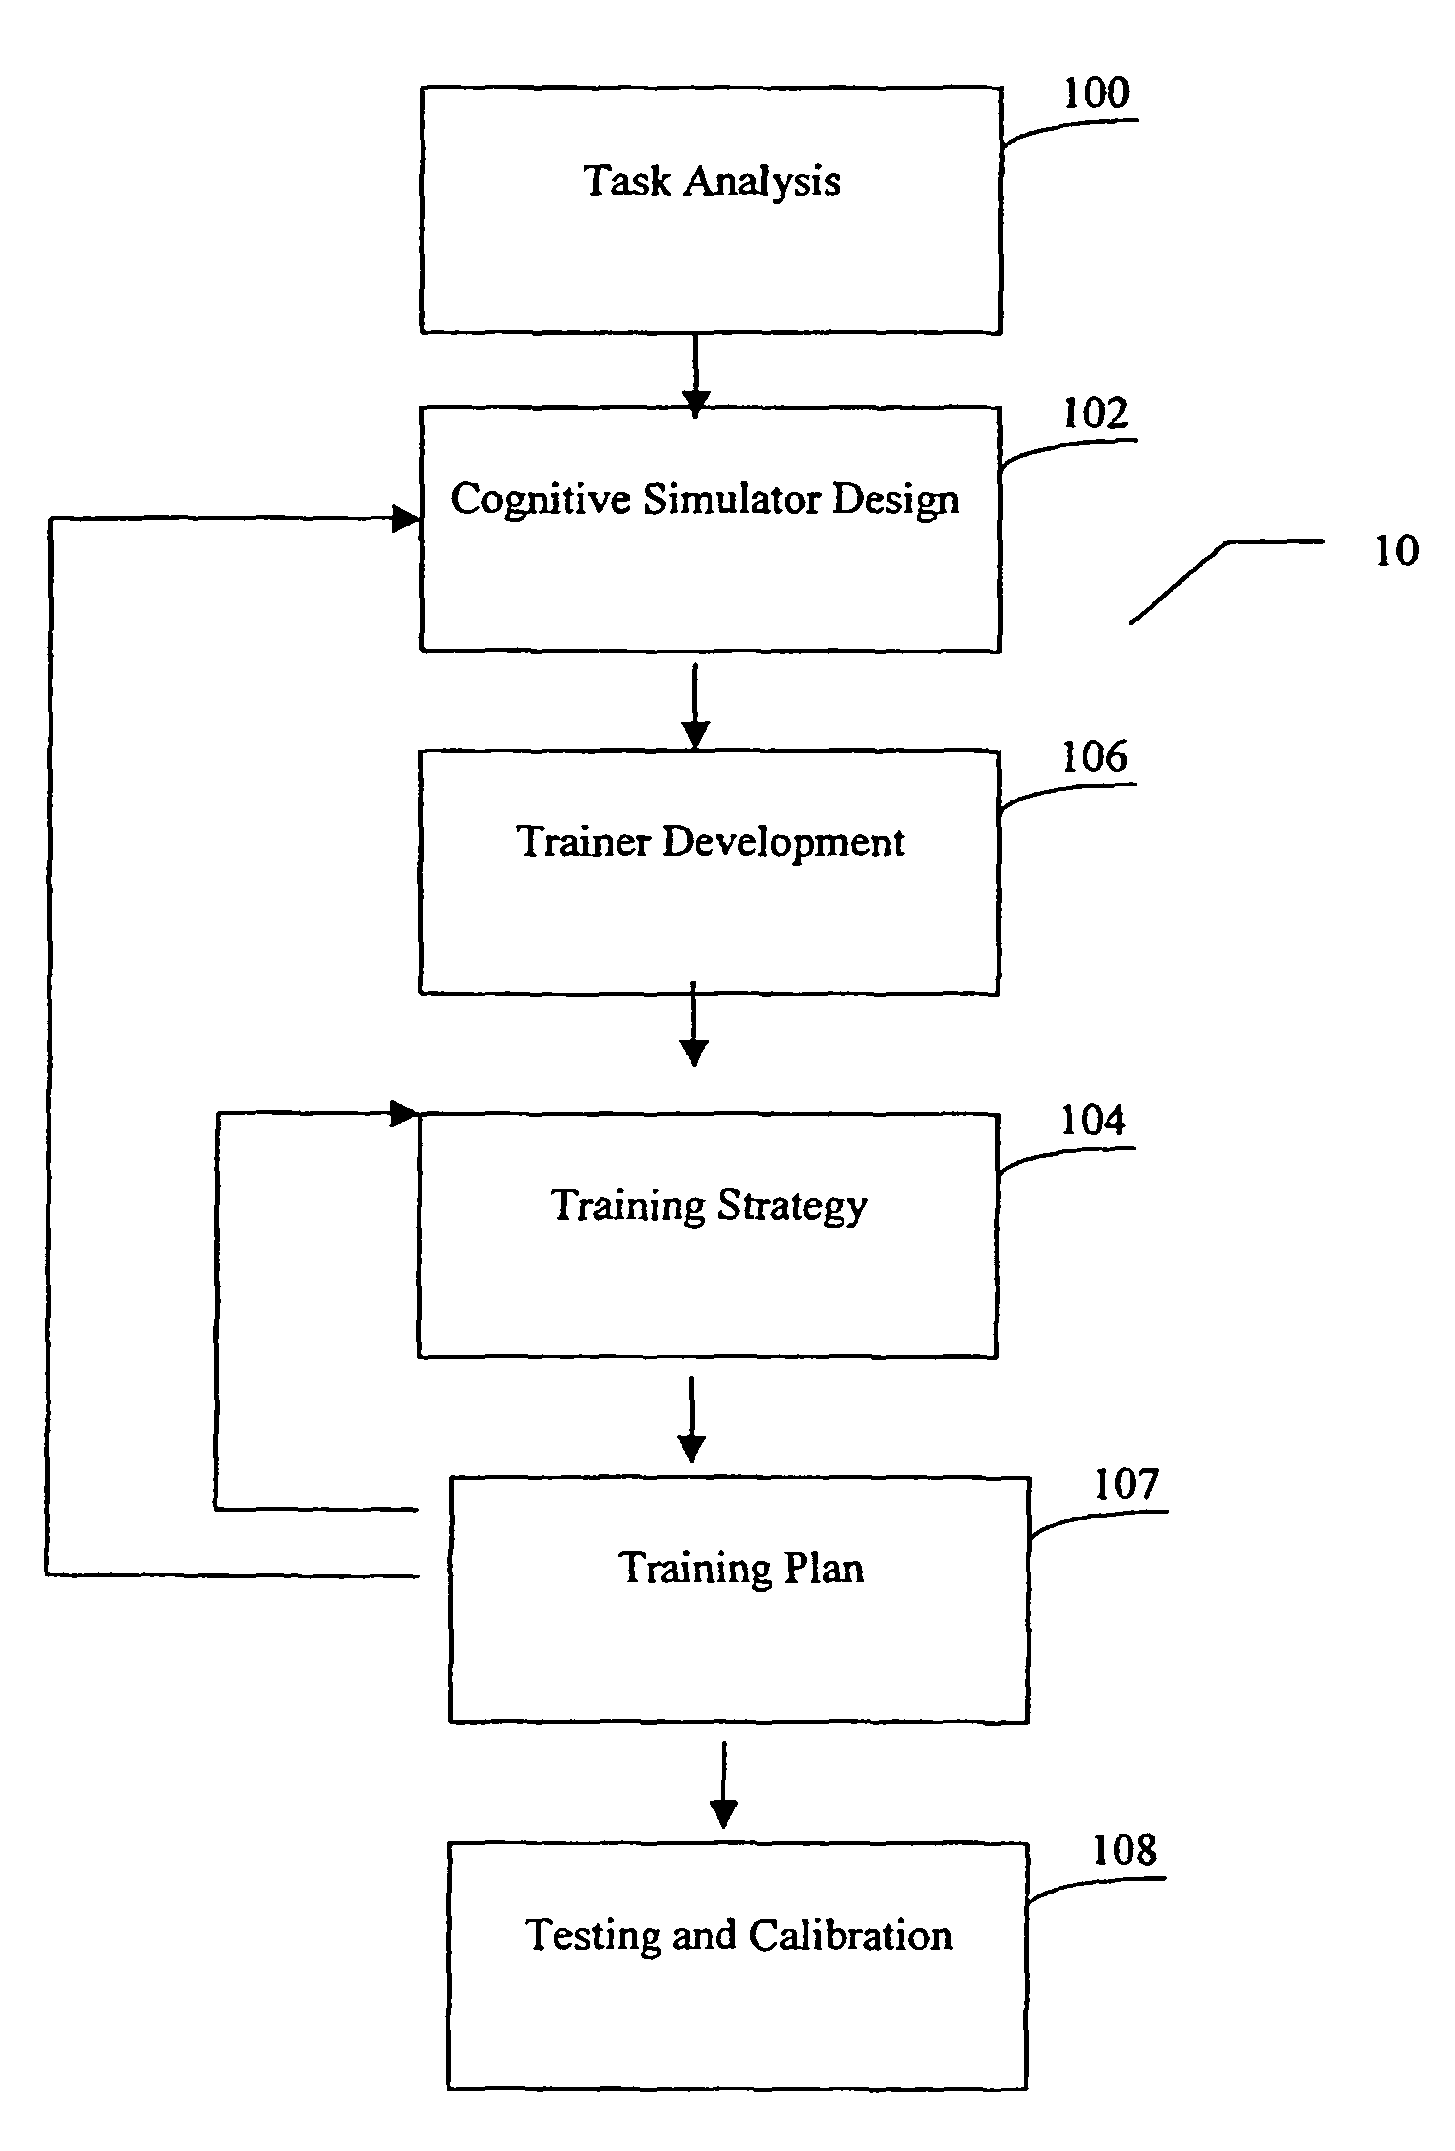 System and method for evaluation and training using cognitive simulation